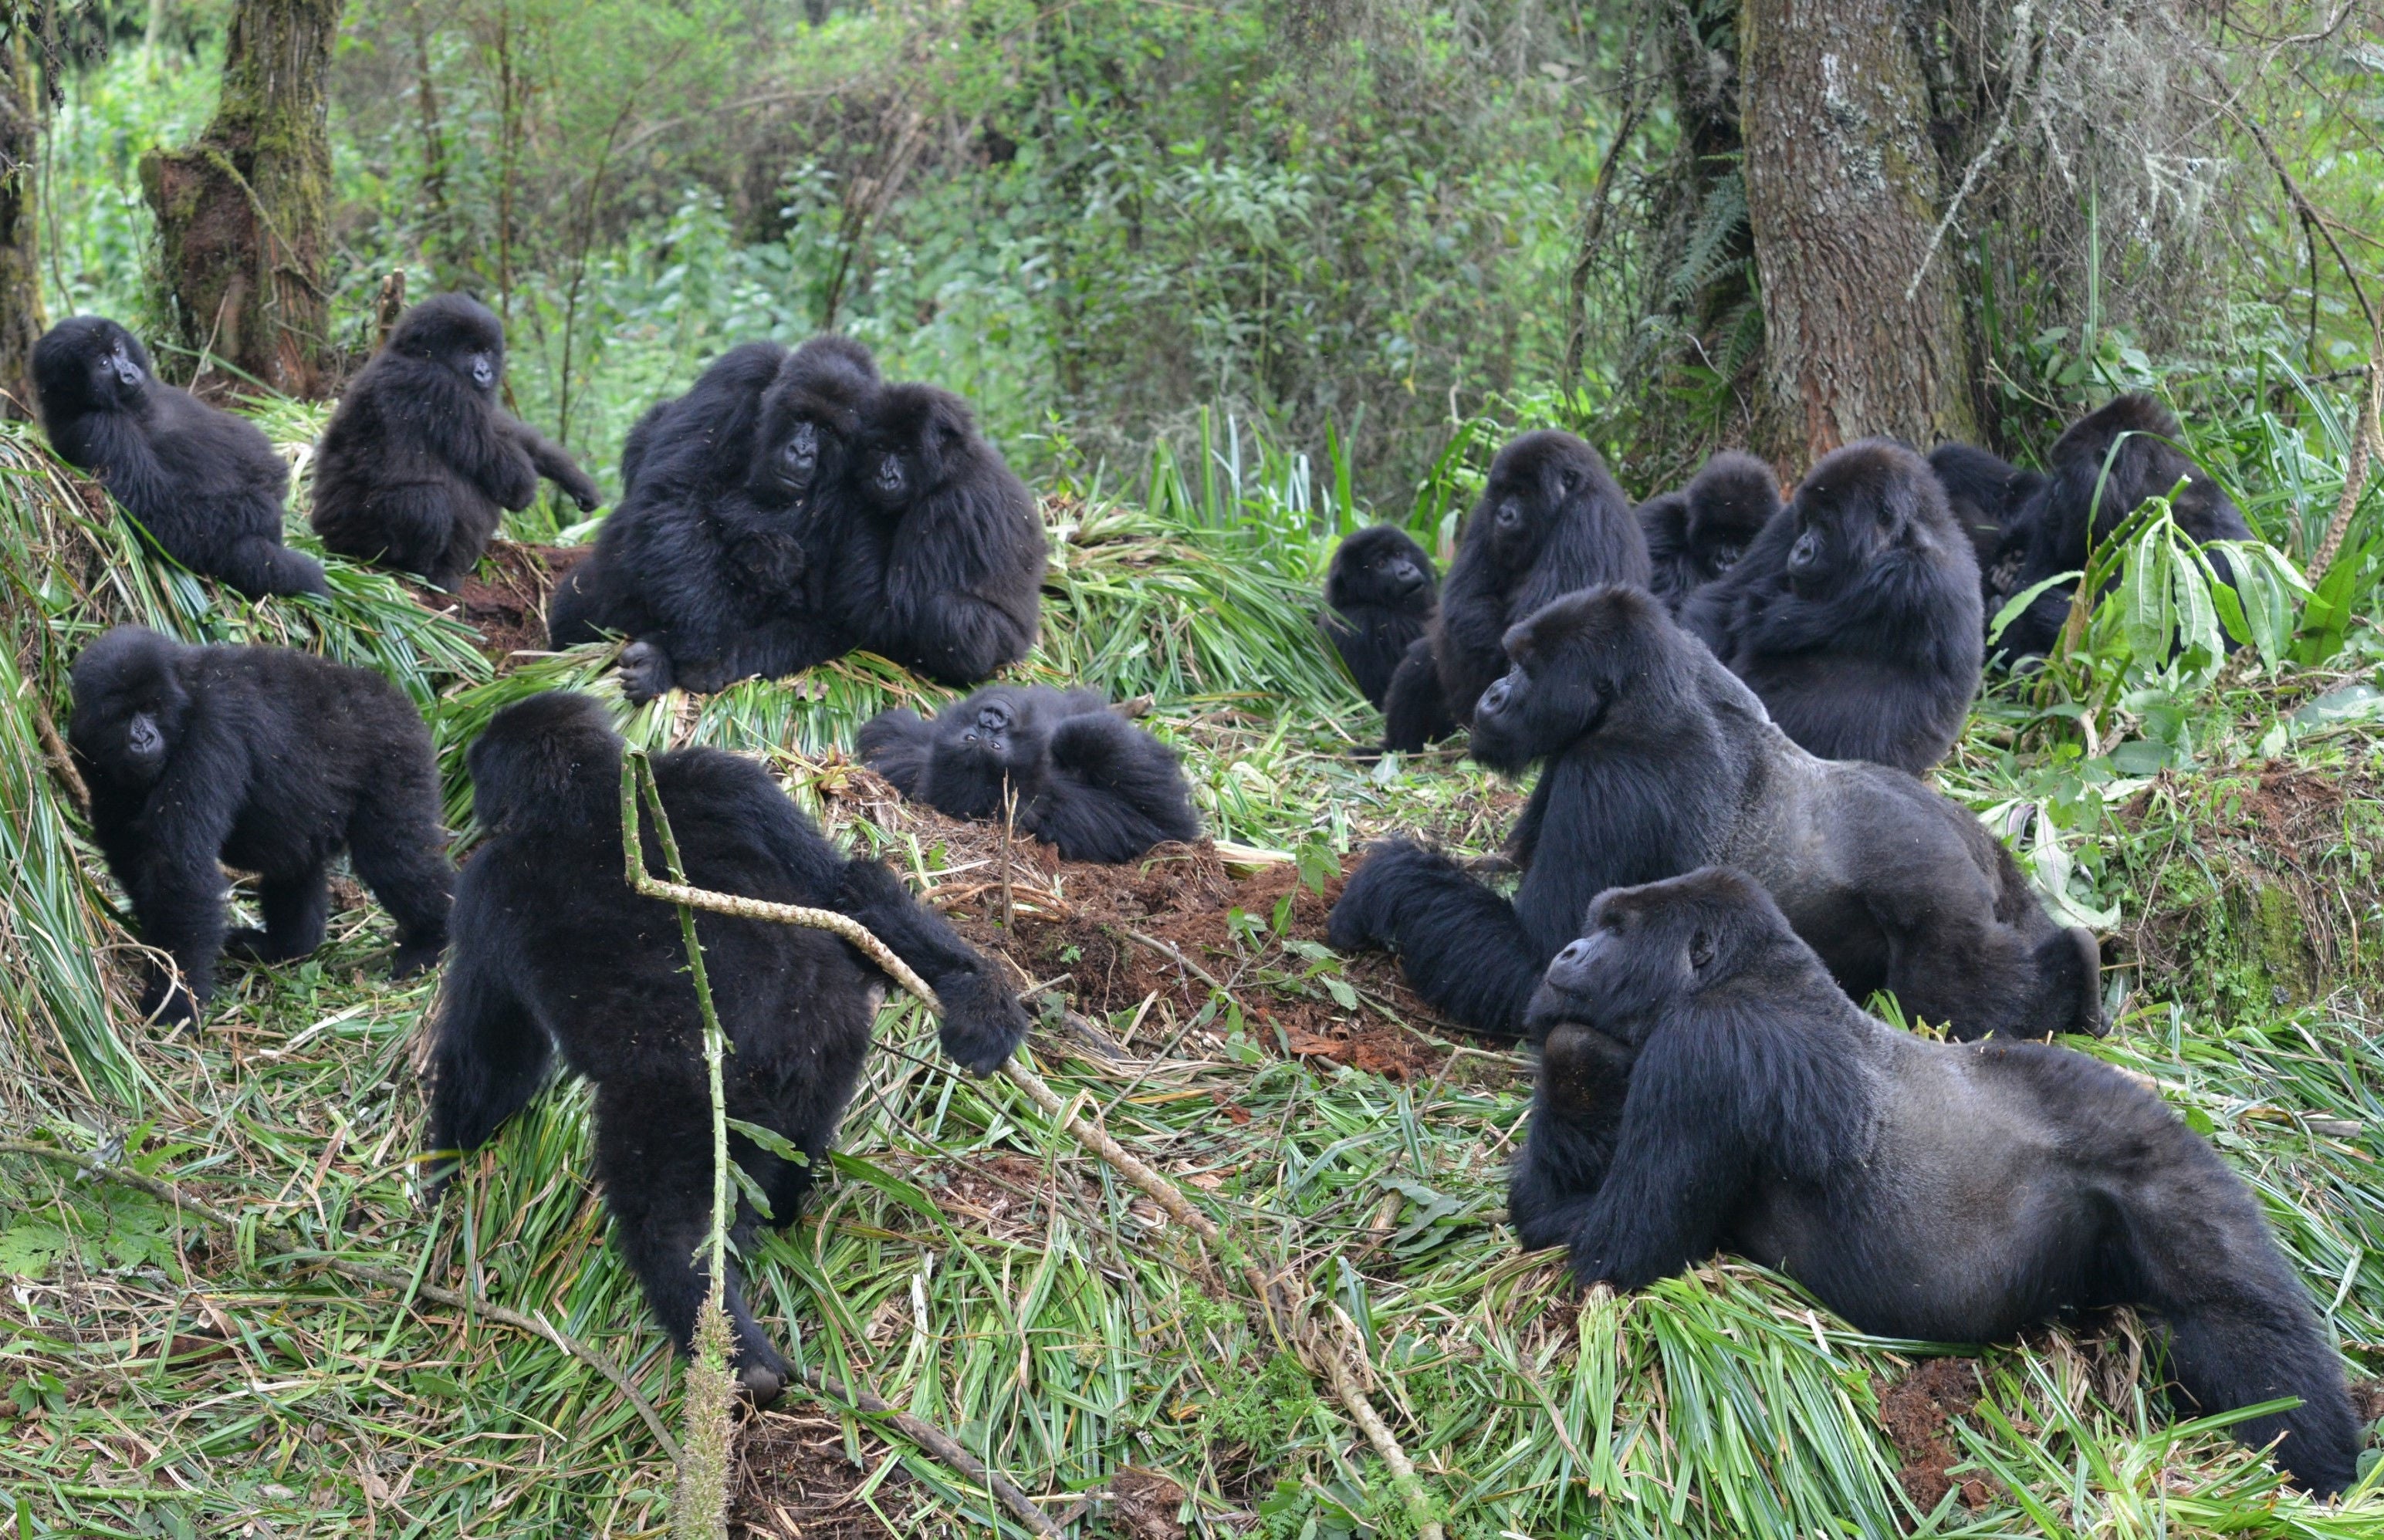 Gorillas monitored by the Fossey Fund gathers for an afternoon rest in Rwanda’s Volcanoes National Park